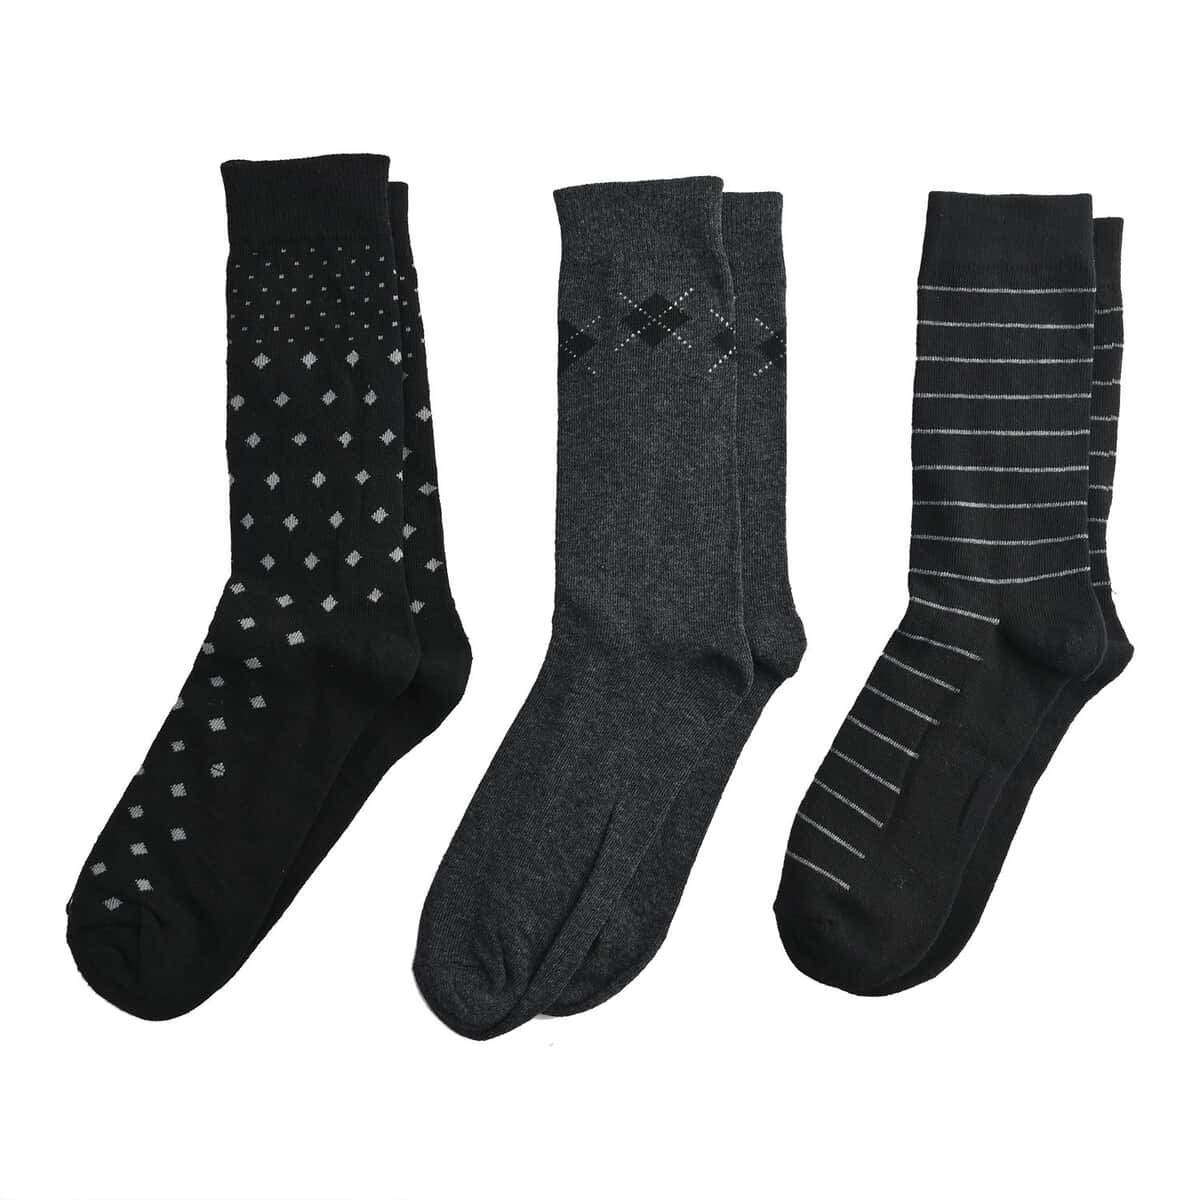 Marco Cavelli Black and Gray Set of 3 Men's Dress Socks, Breathable and Soft Socks for Men, Polyester and Cotton Socks, image number 0